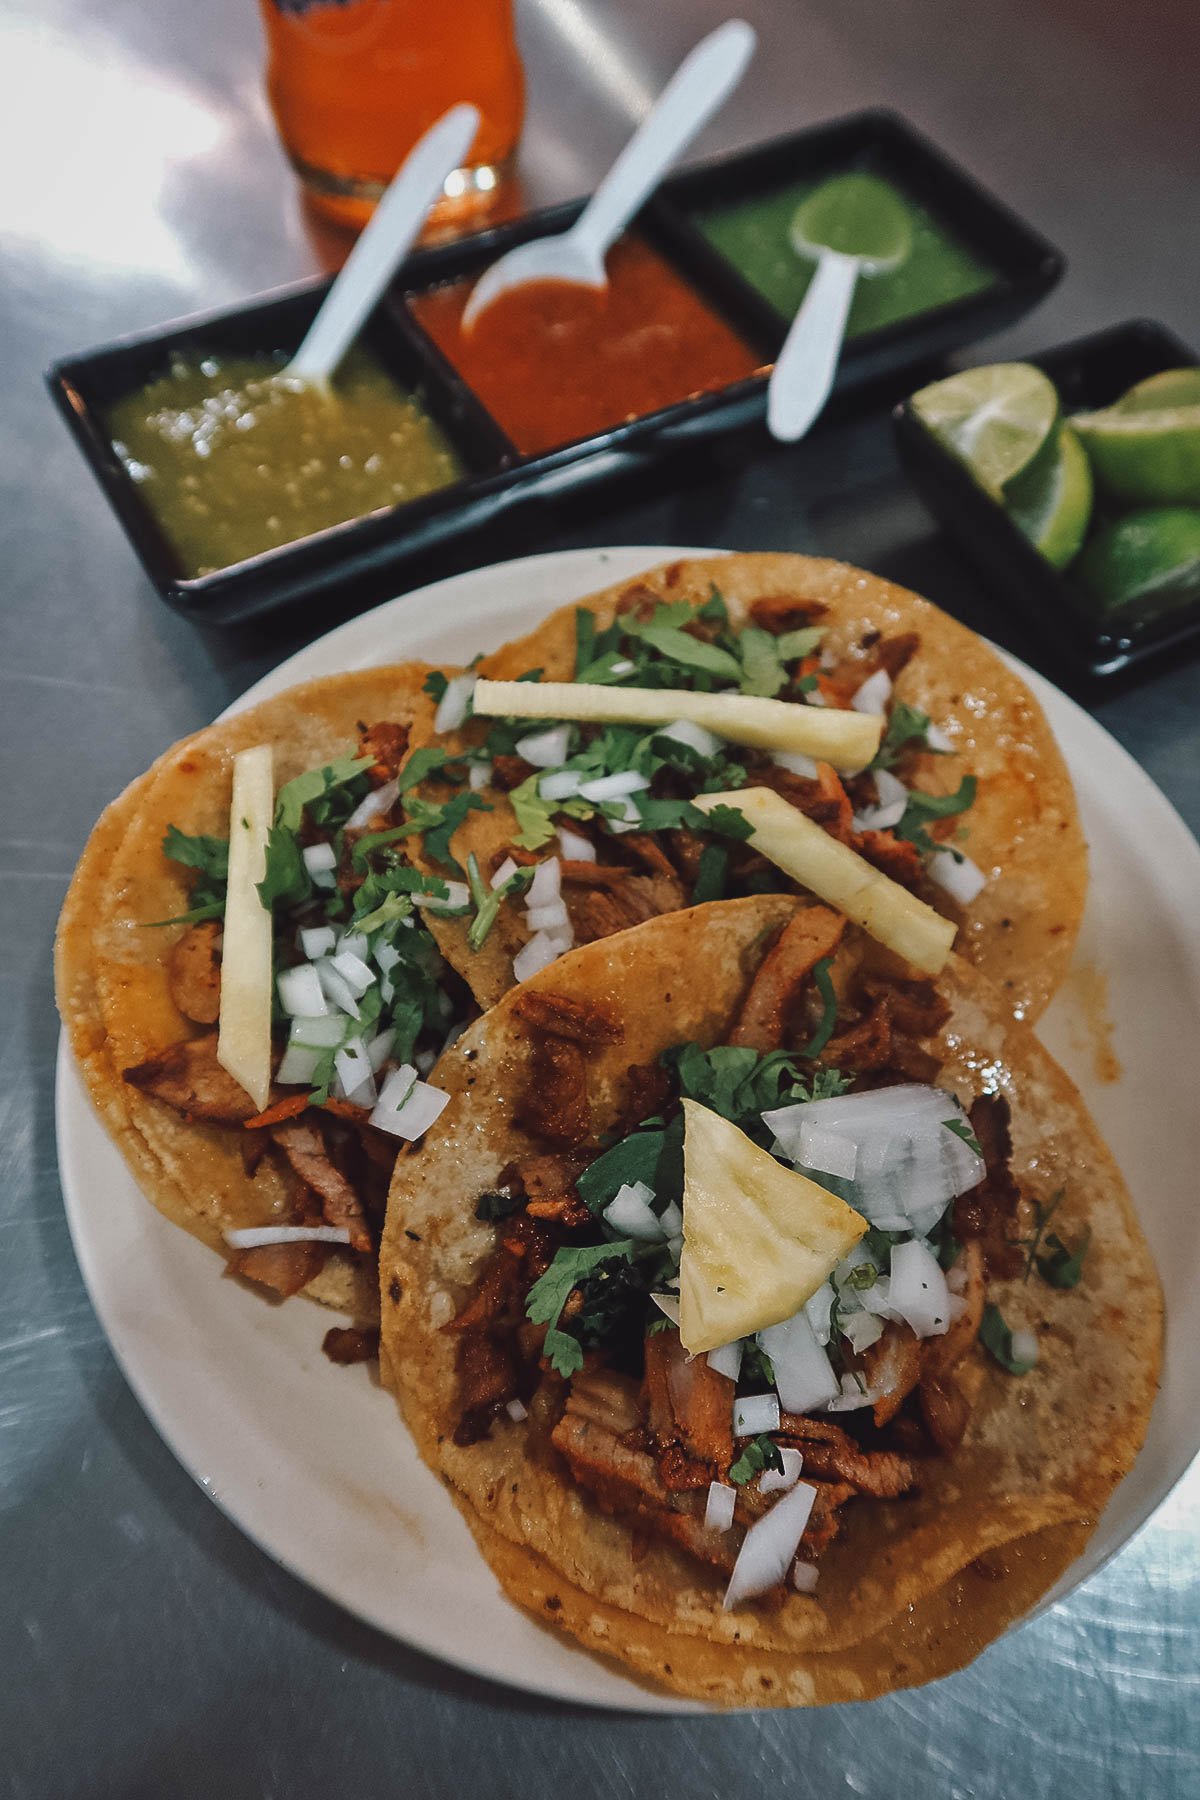 Plate with three tacos al pastor